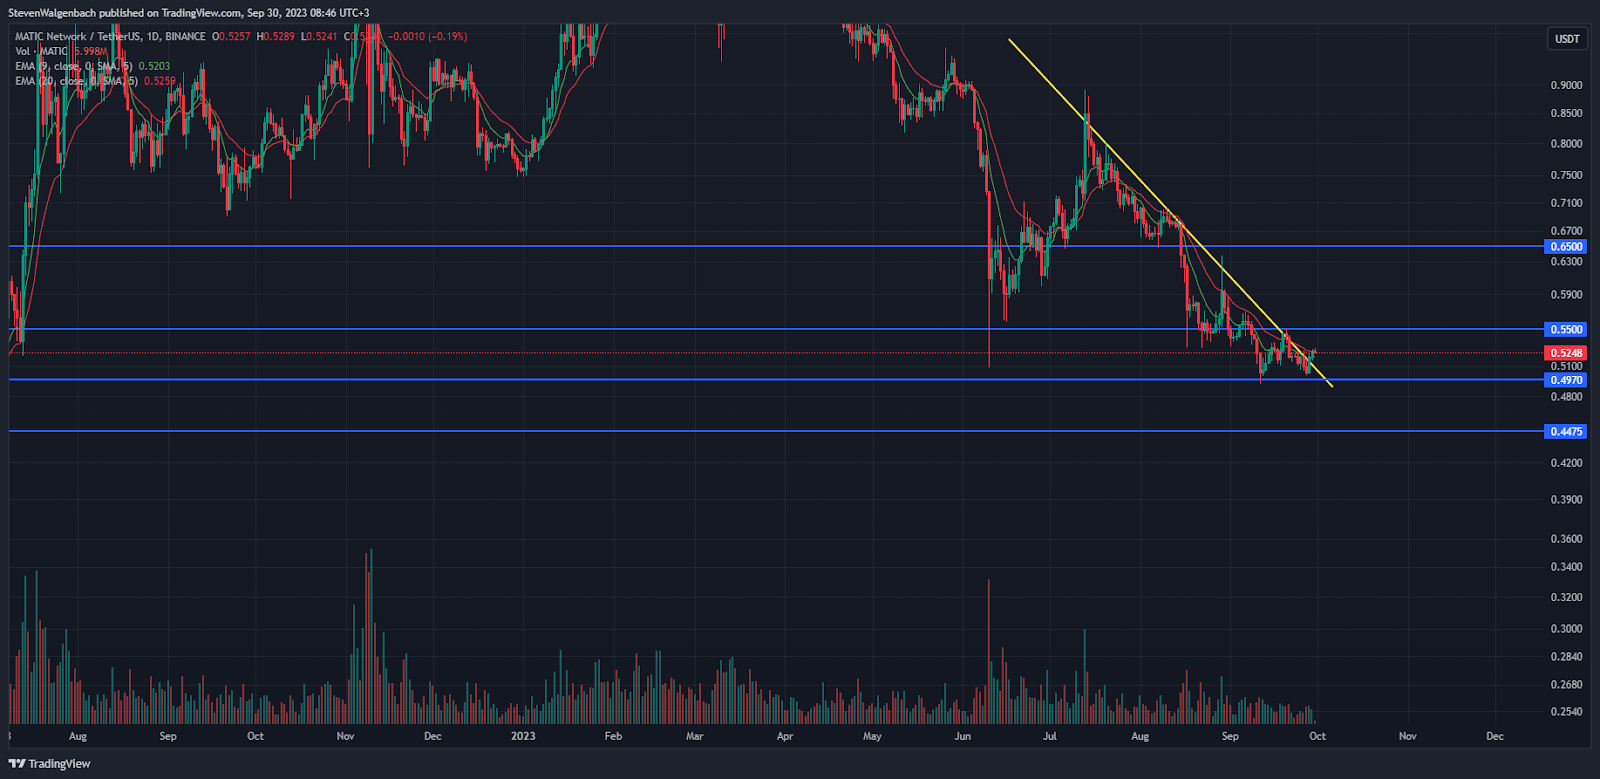 Daily chart for MATIC/USDT (Source: TradingView)